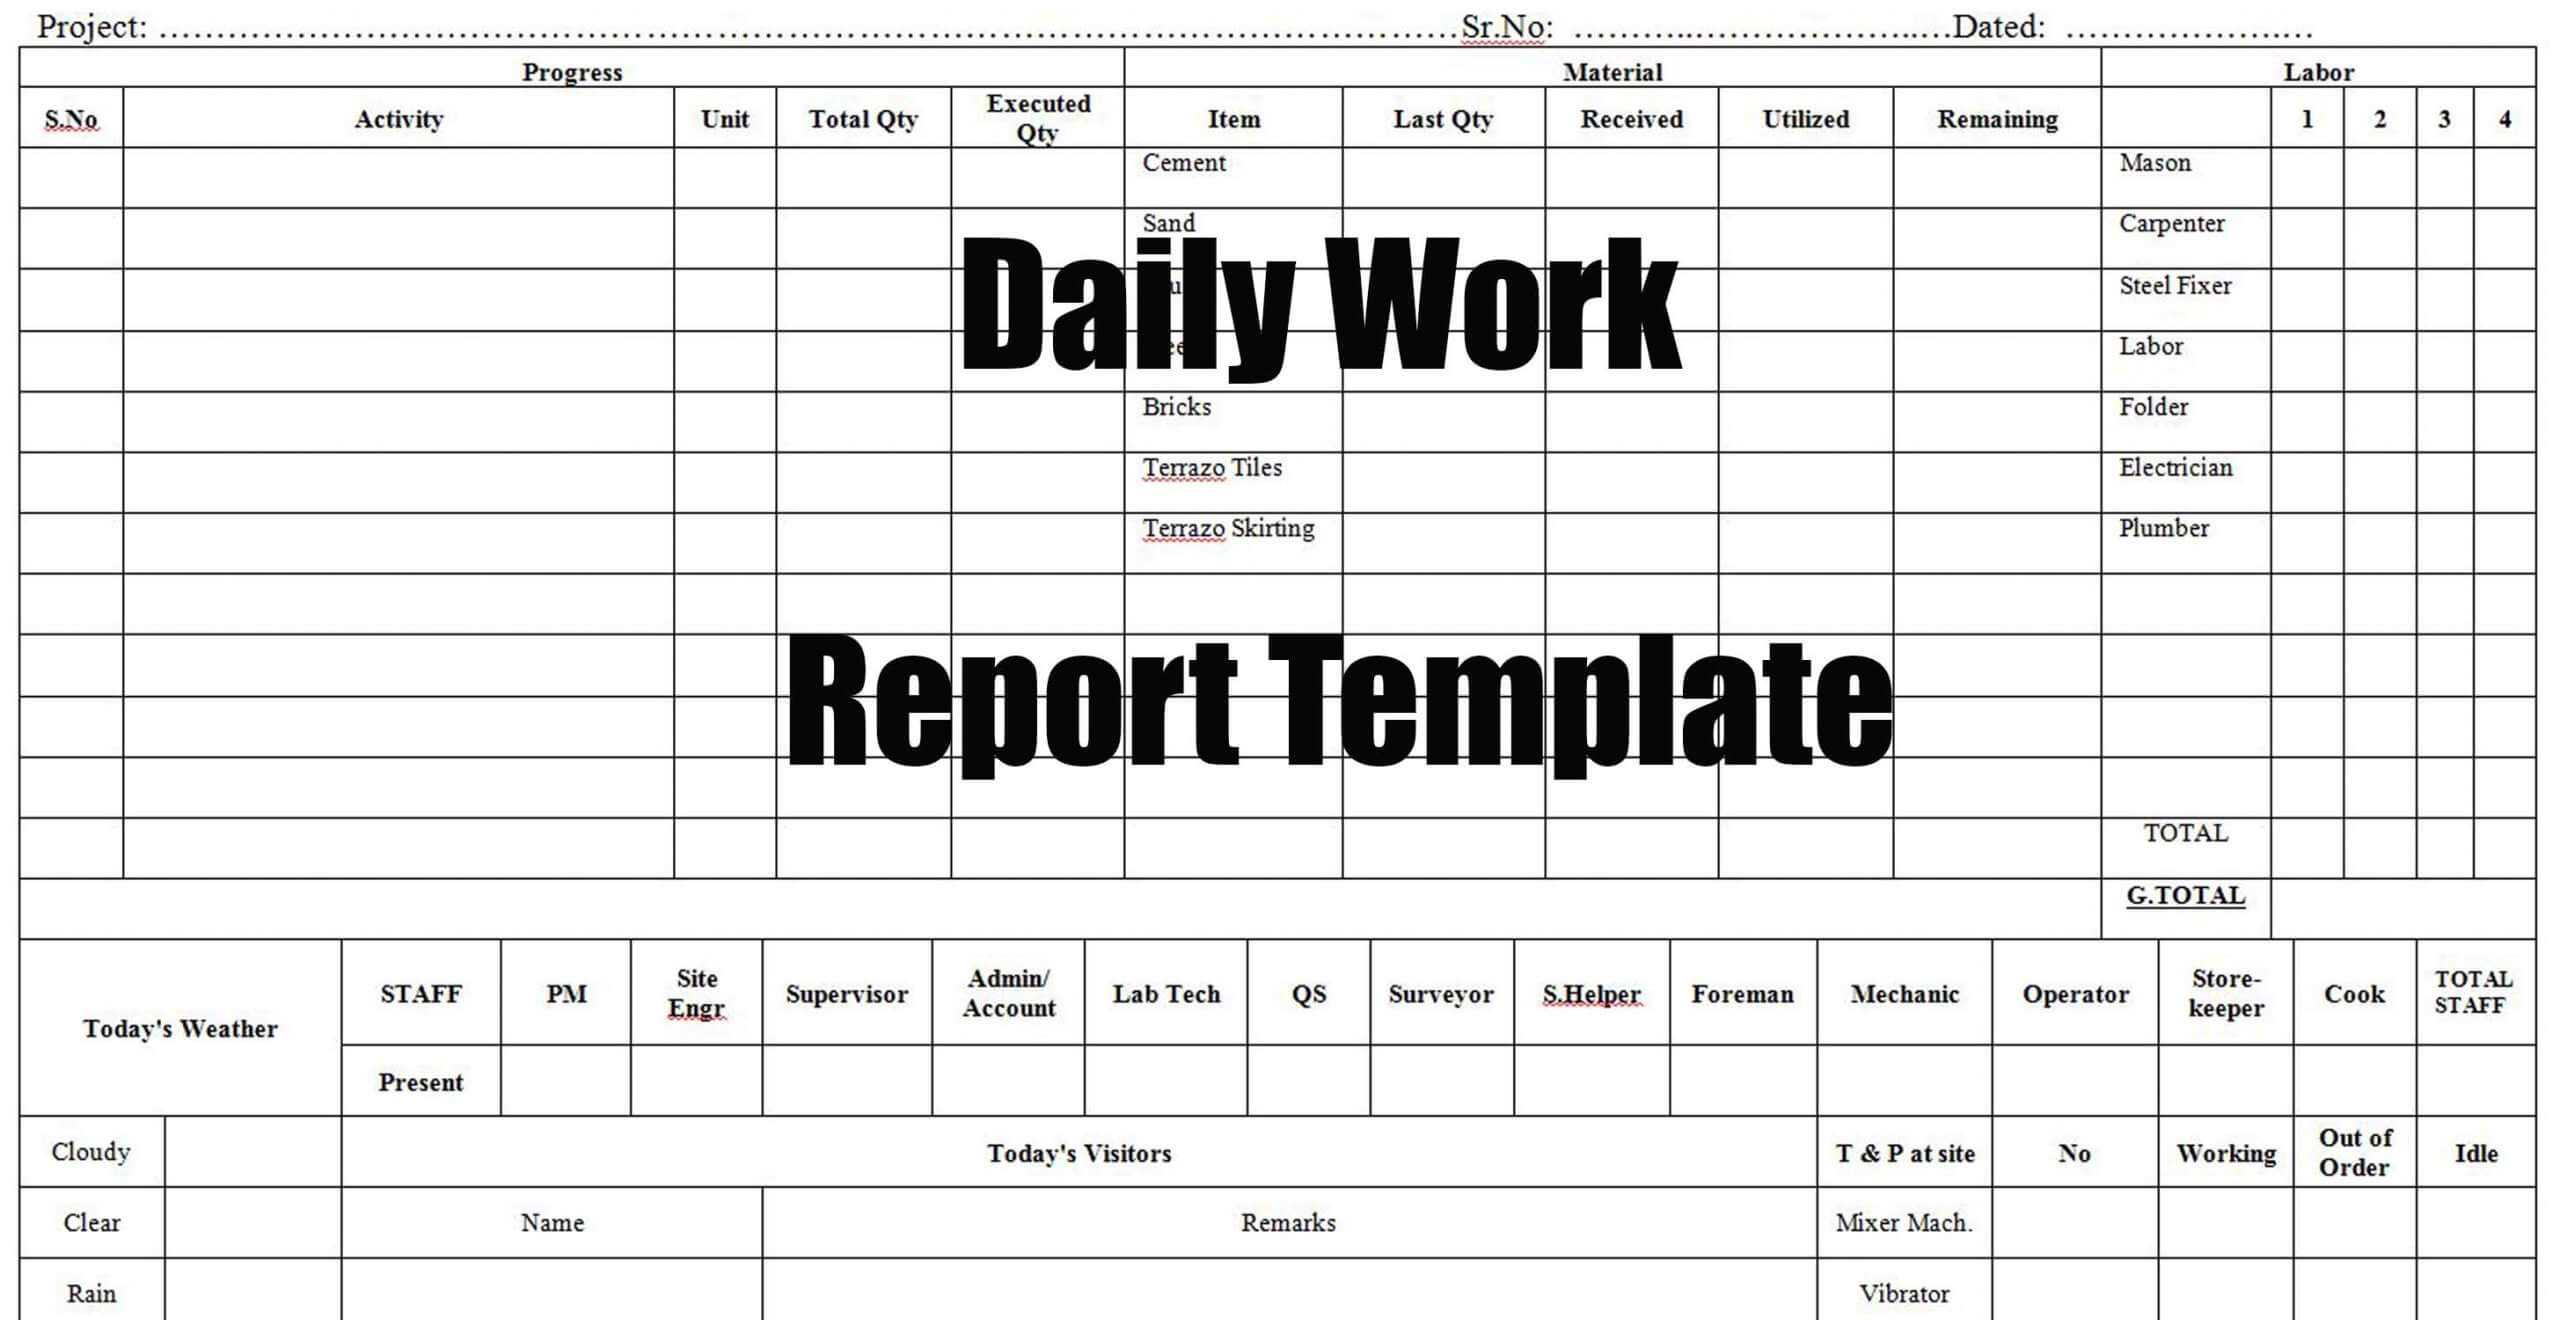 Daily Work Report Template - Engineering Discoveries Intended For Daily Work Report Template